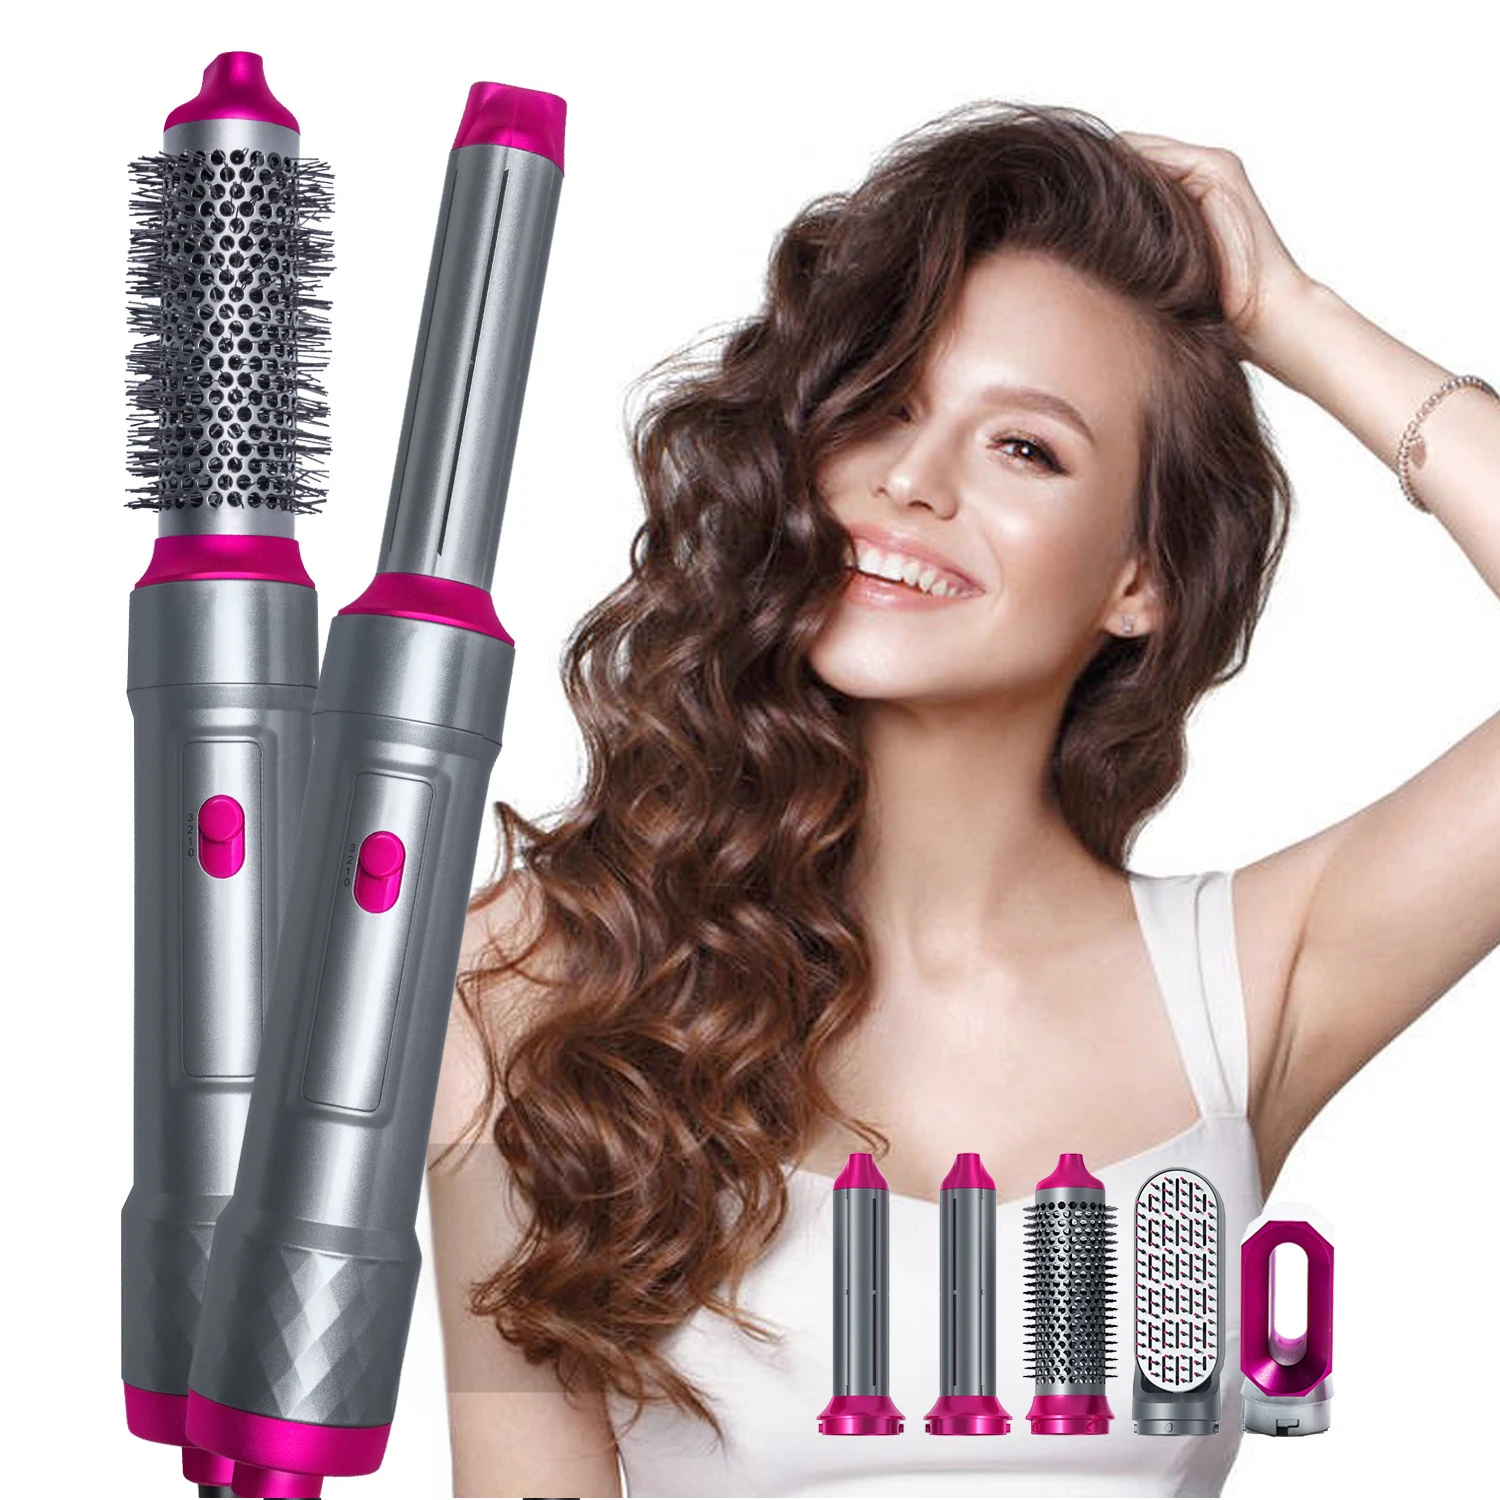 Set 5 in 1 Hair Dryer Hot Air Comb Professional Curler Straightener Styling Tool Hair Dryer Home Kit Wet and Dry Curler Straight